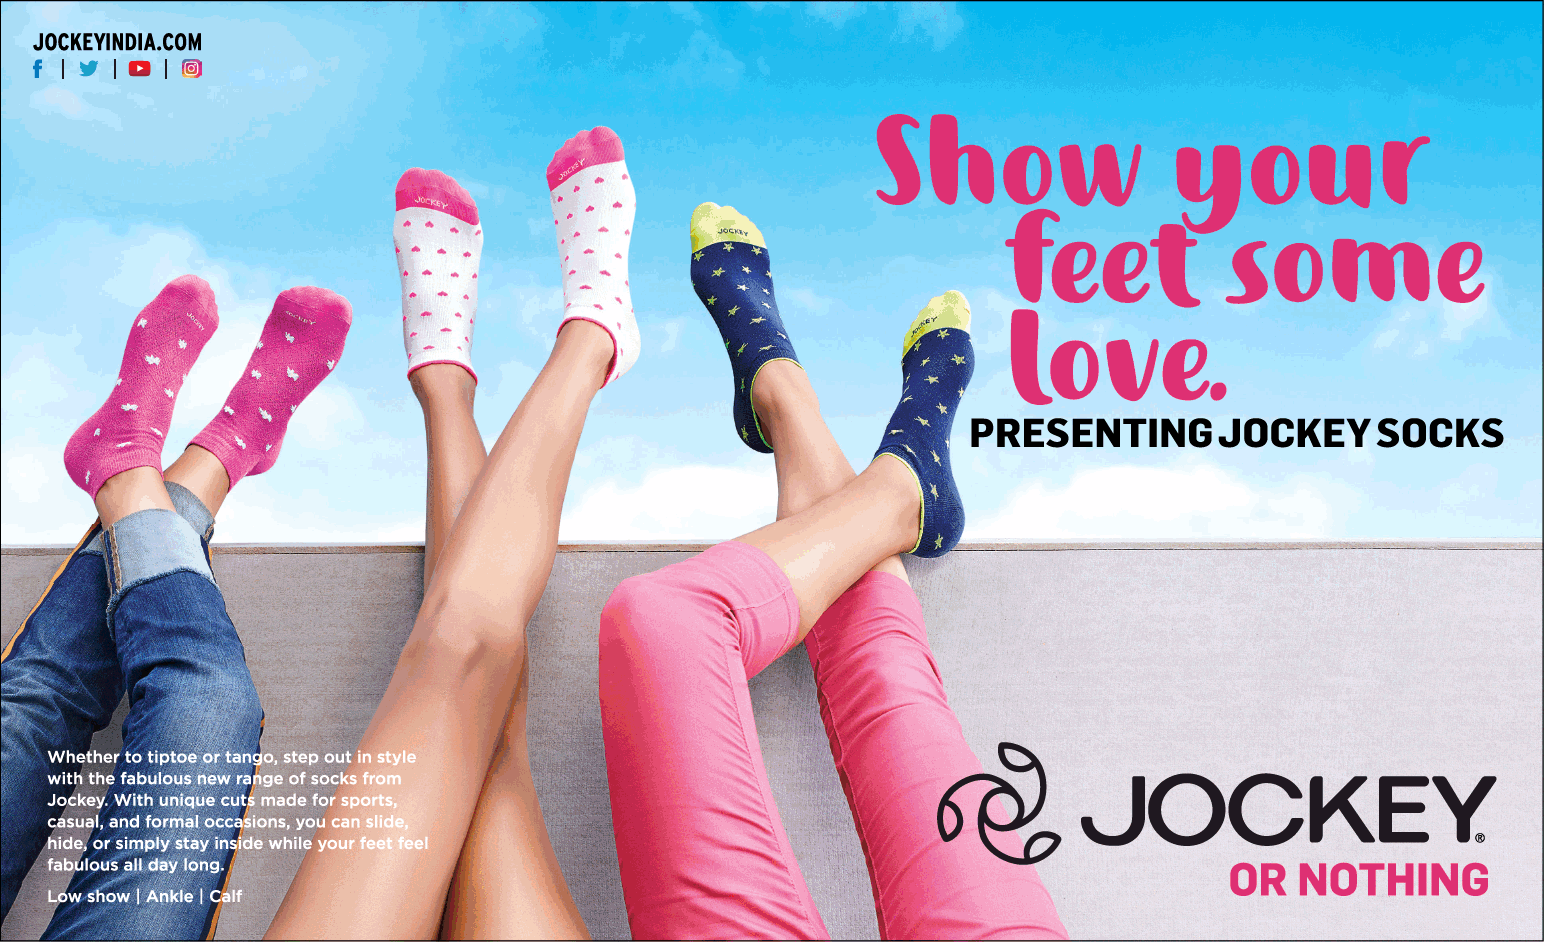 jockey-socks-show-your-feet-some-love-ad-times-of-india-chennai-20-12-2018.png